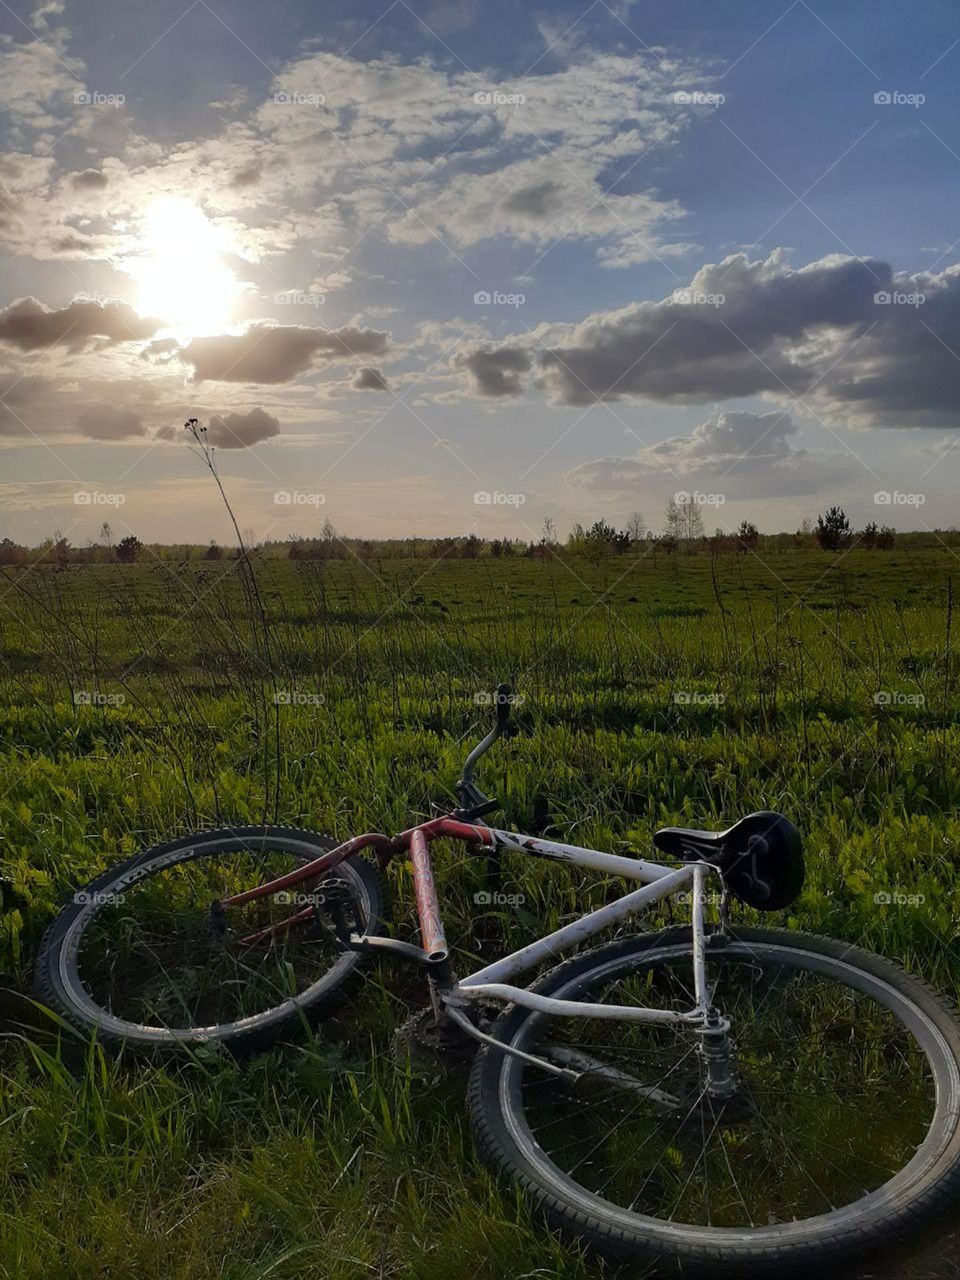 A bicycle ride through the fields in summer weather